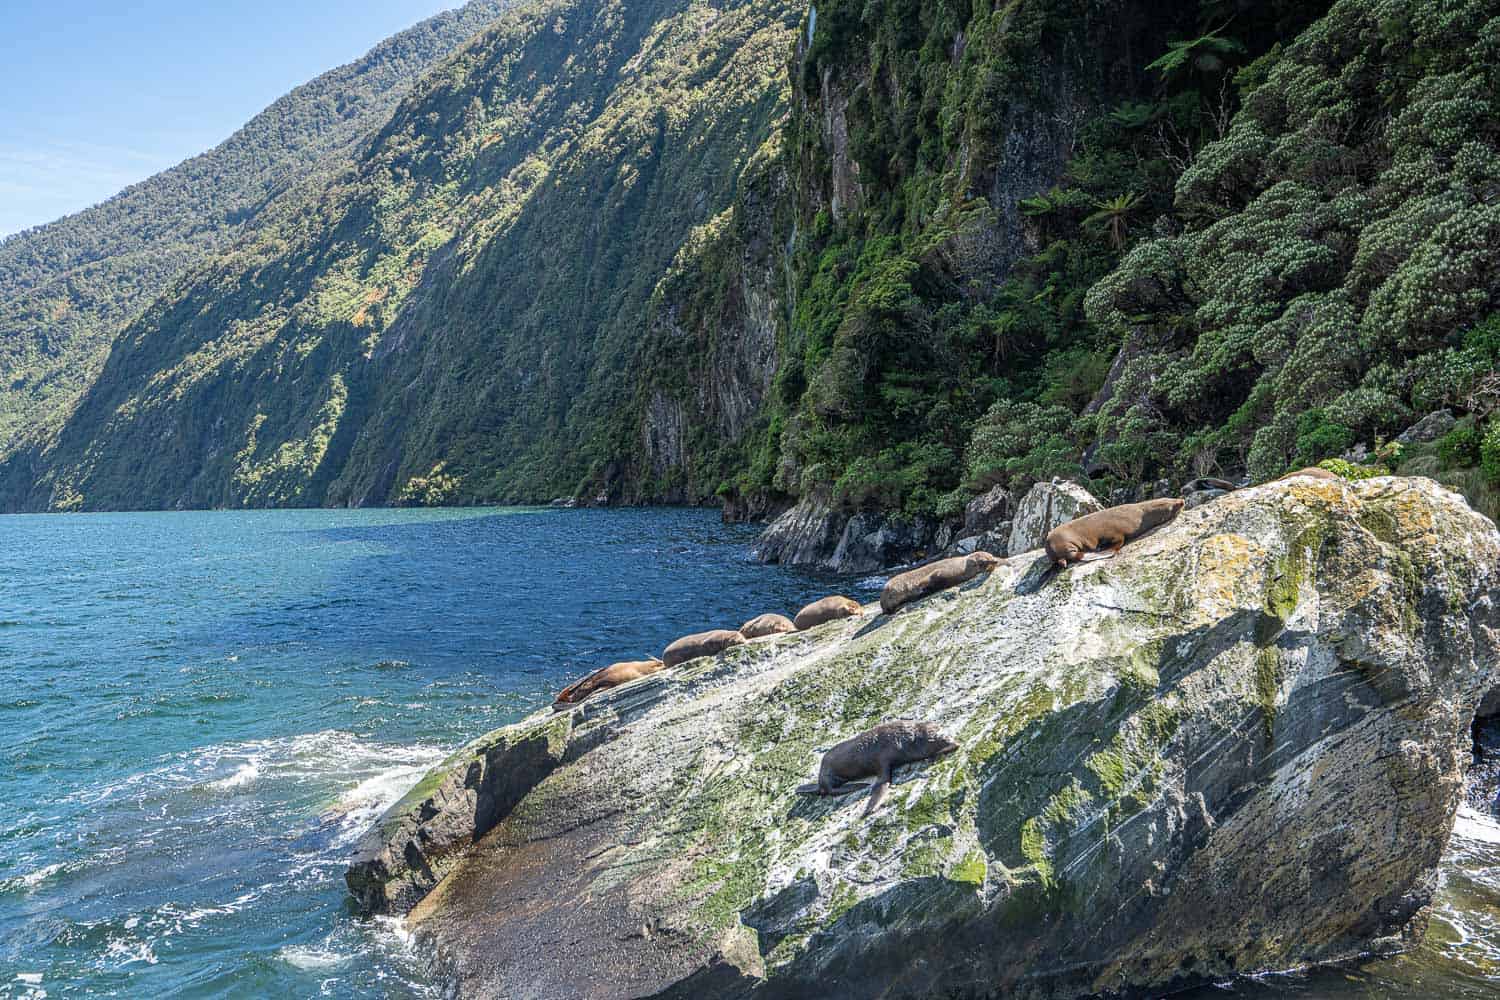 Fur seals lying on a rock at Milford Sound